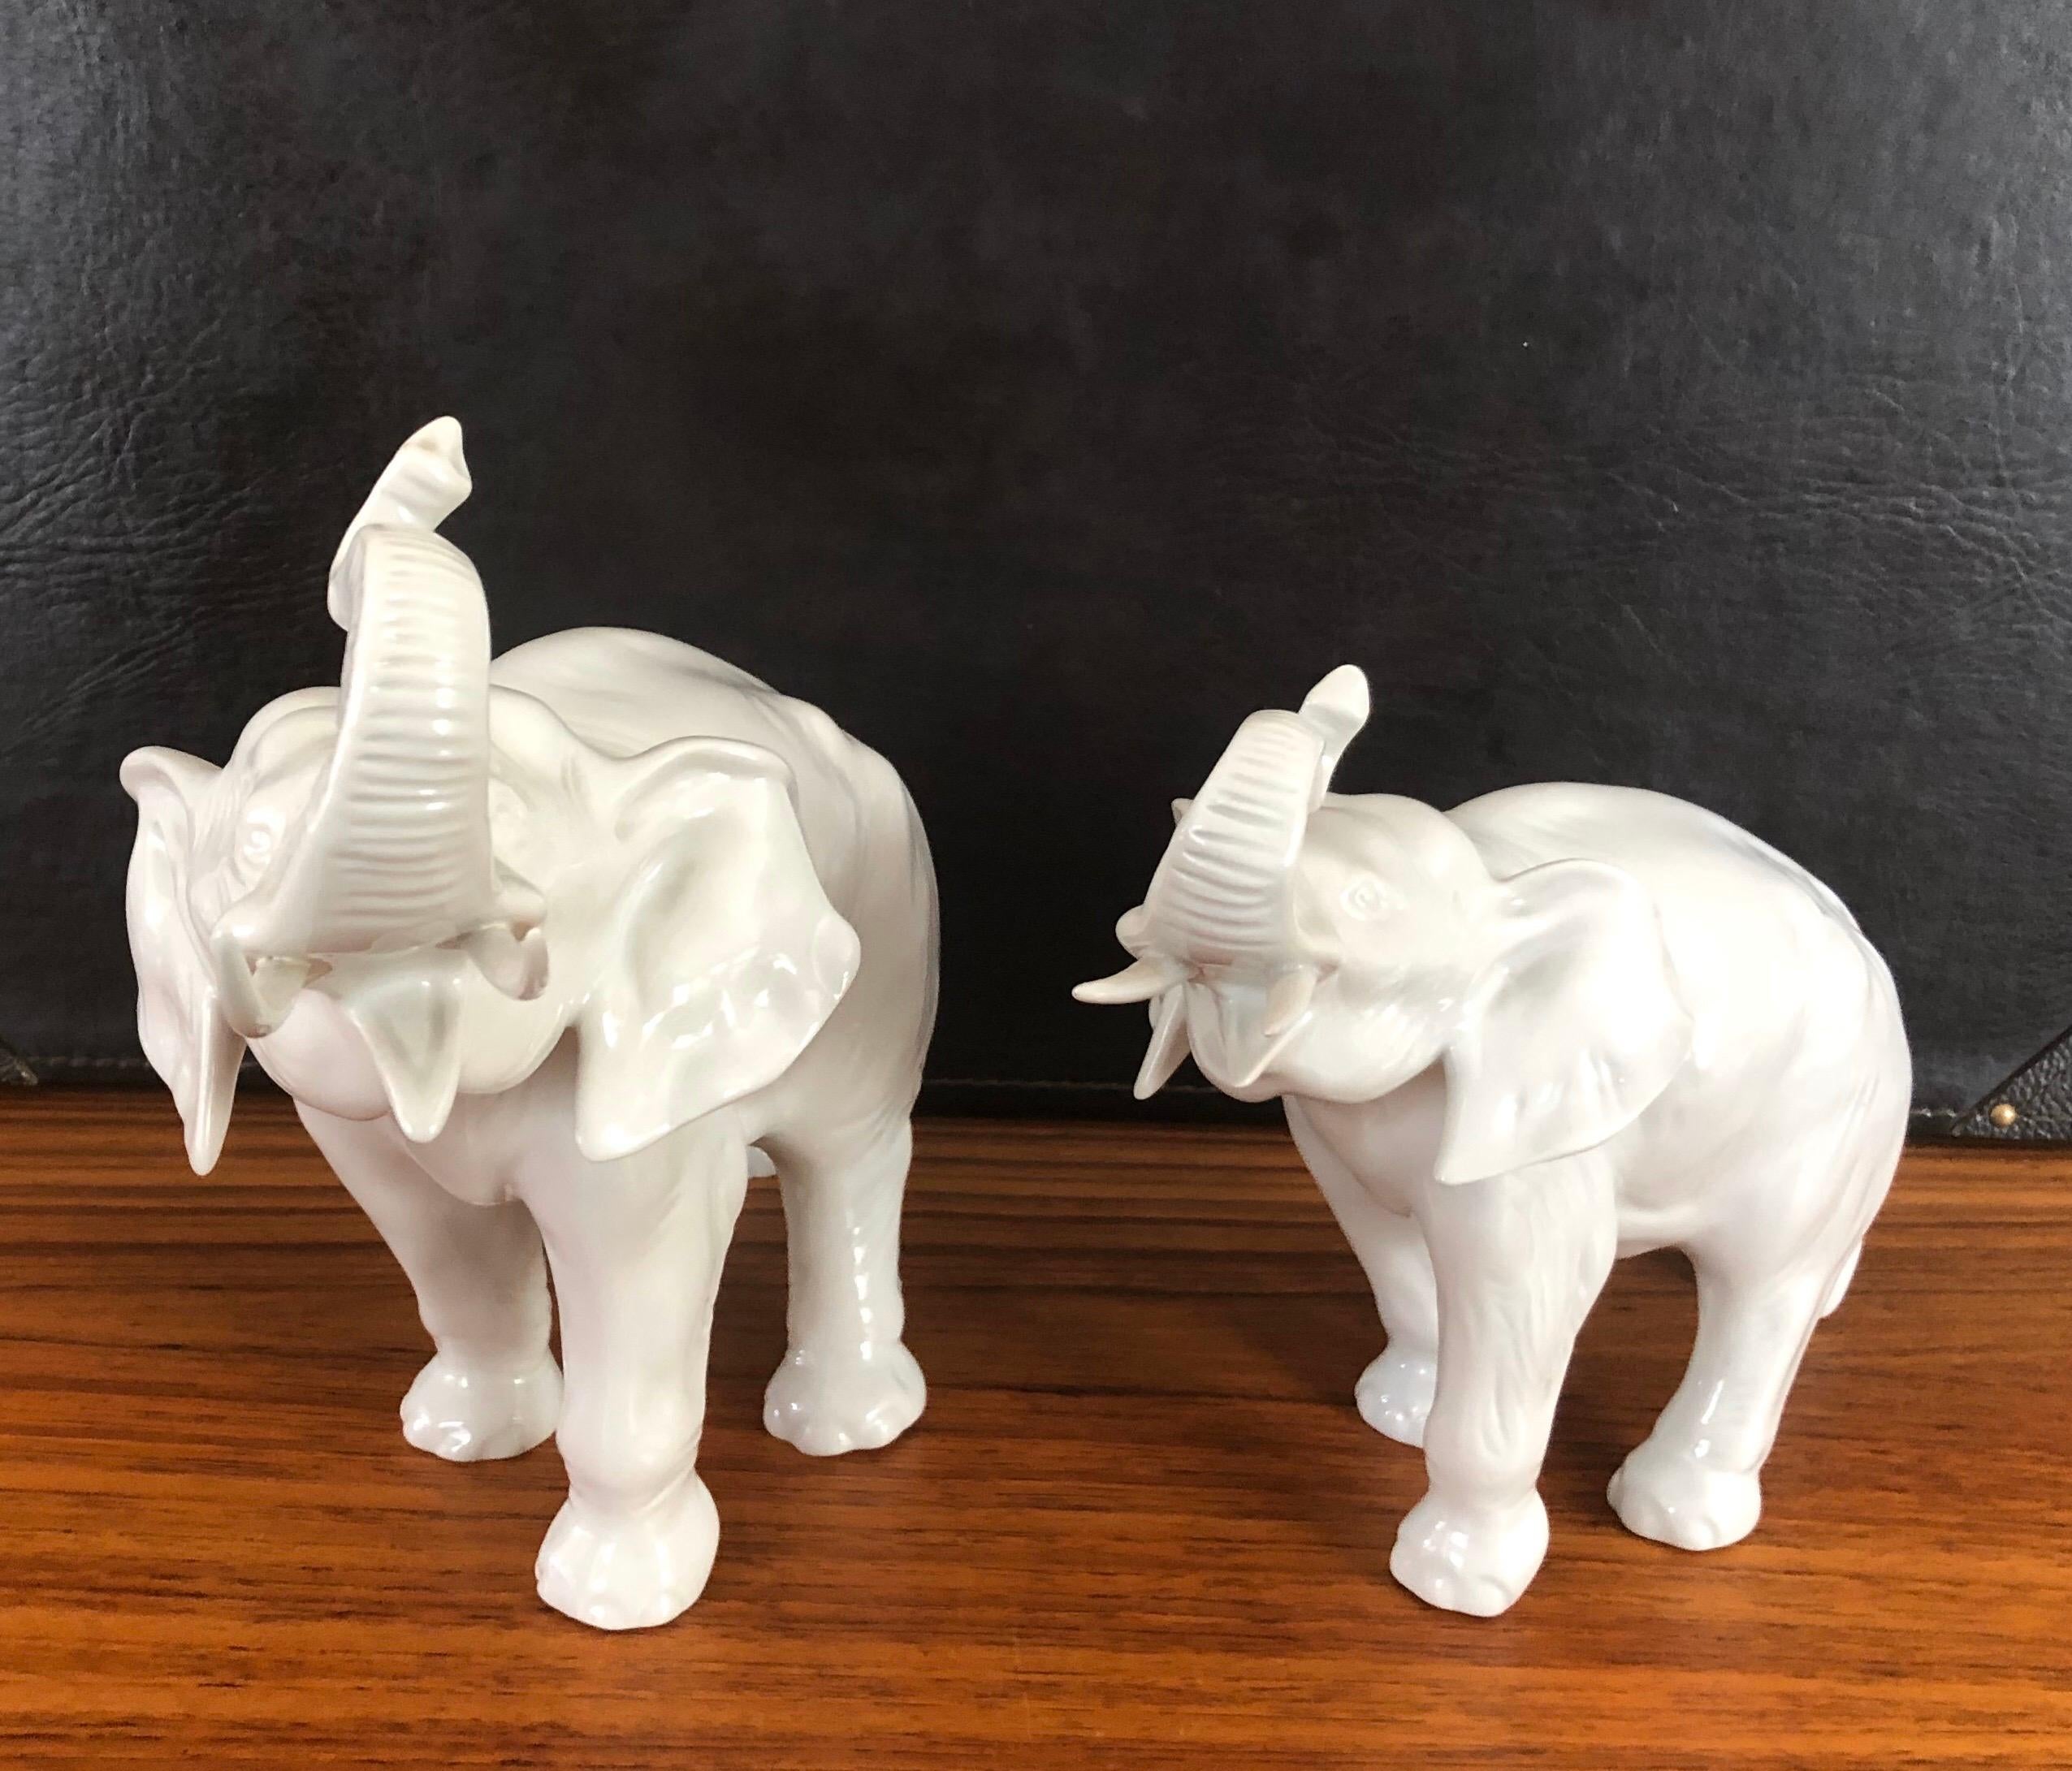 Gorgeous pair of white porcelain elephant sculptures by Royal Dux of the Czech Republic, circa 1970s. Impressive detail and a stunning high gloss finish. The pair are in excellent condition with no chips, cracks or crazing. The large elephant